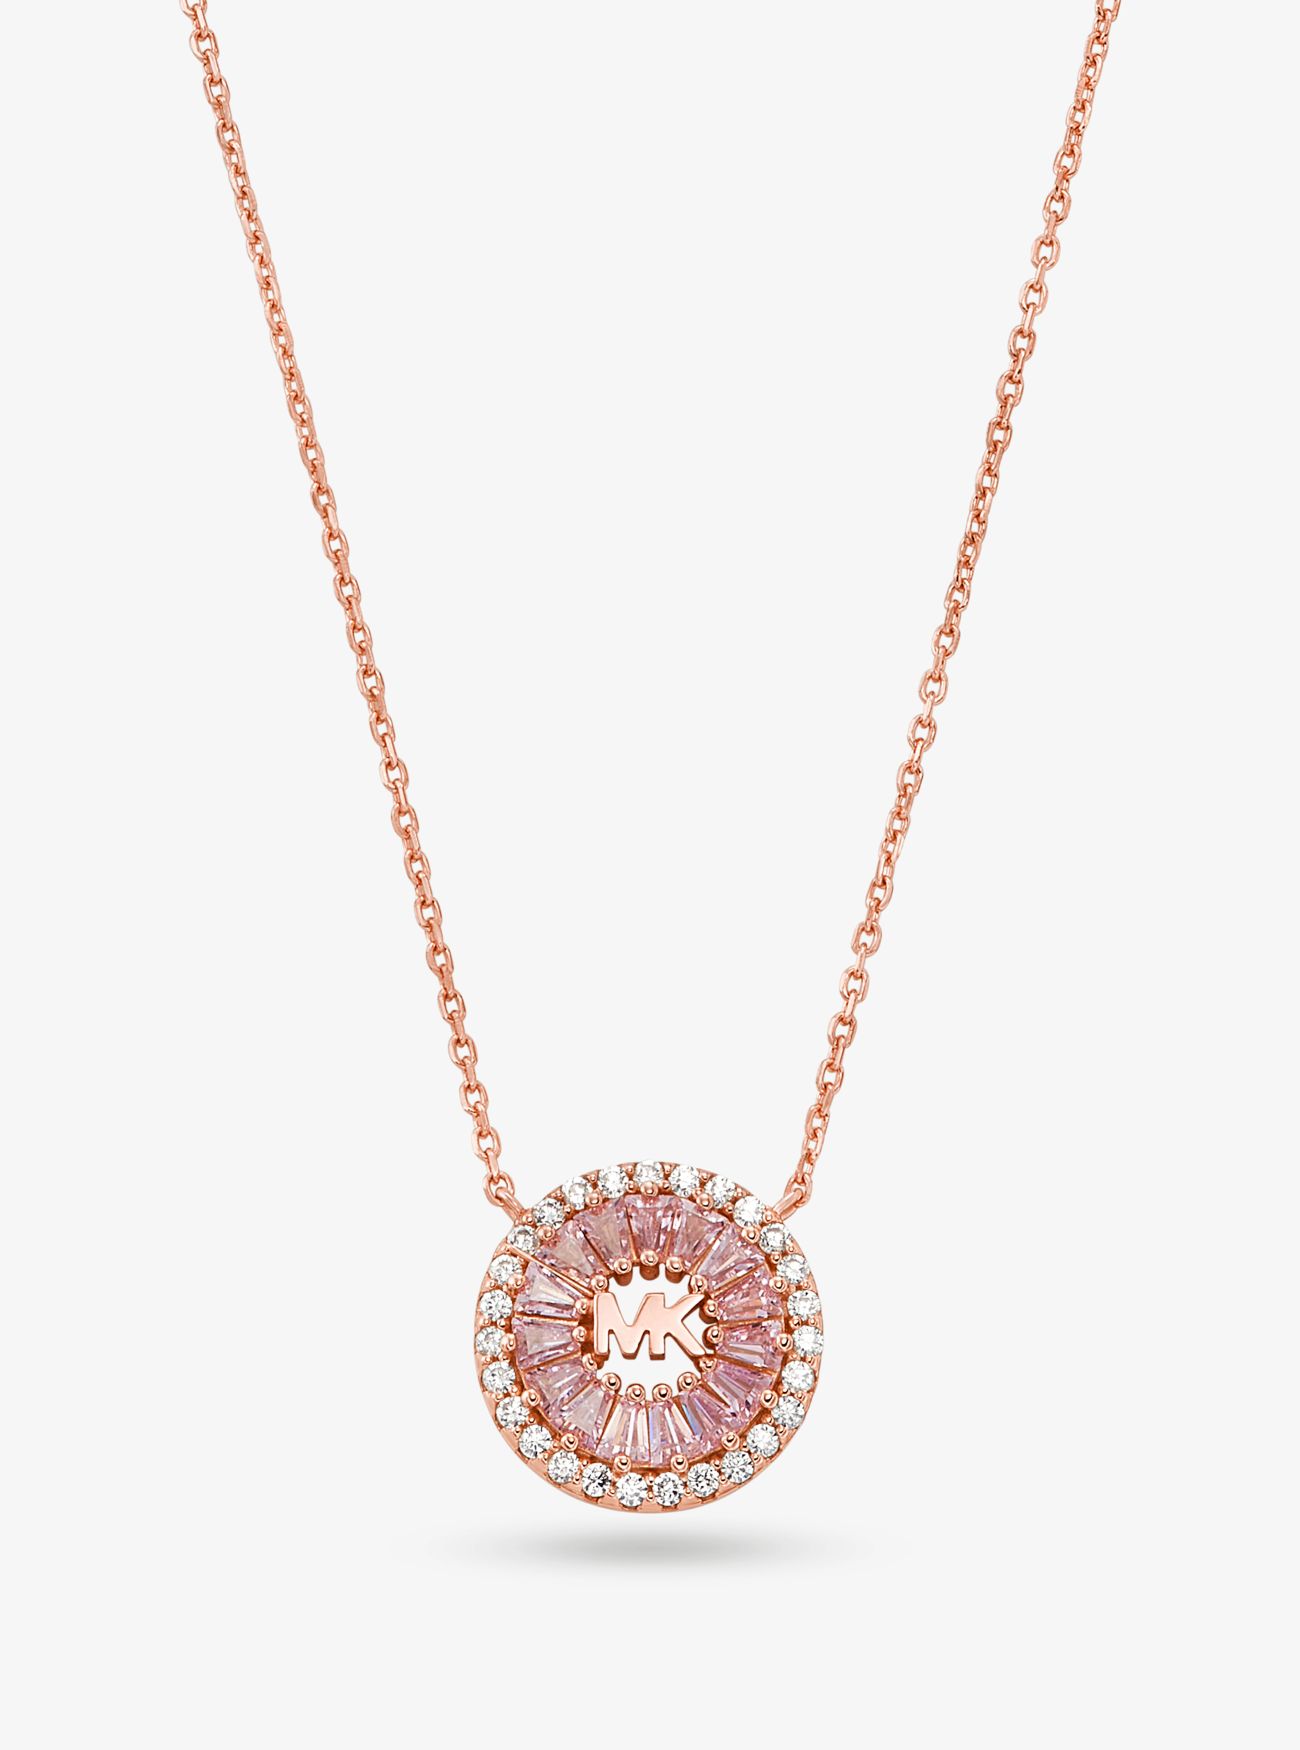 MK Precious Metal-Plated Sterling Silver PavÃ© Halo Necklace - Rose Gold - Michael Kors